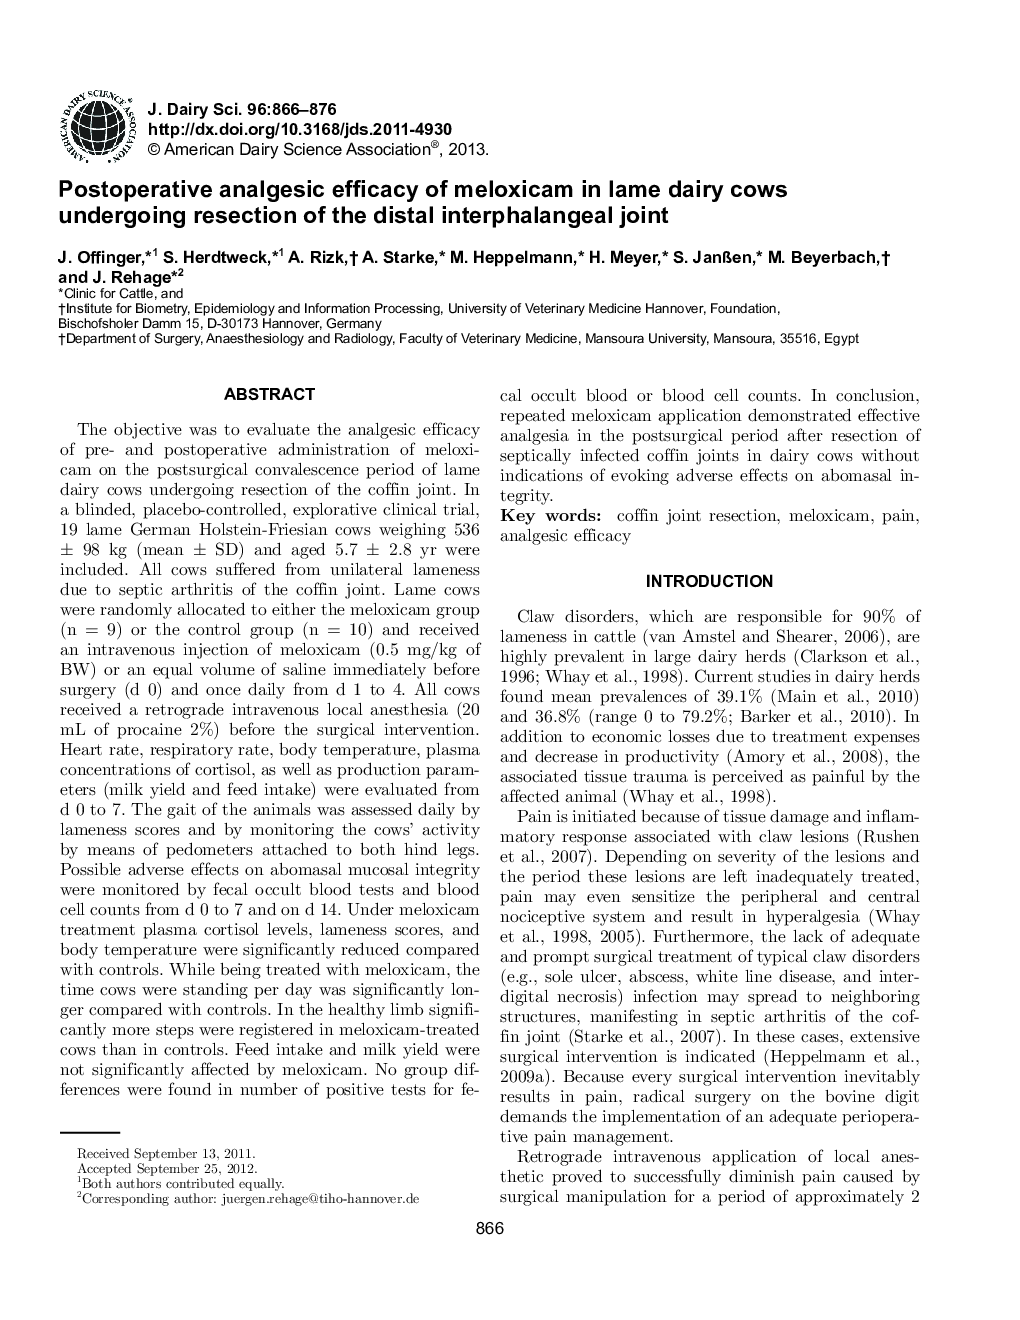 Postoperative analgesic efficacy of meloxicam in lame dairy cows undergoing resection of the distal interphalangeal joint